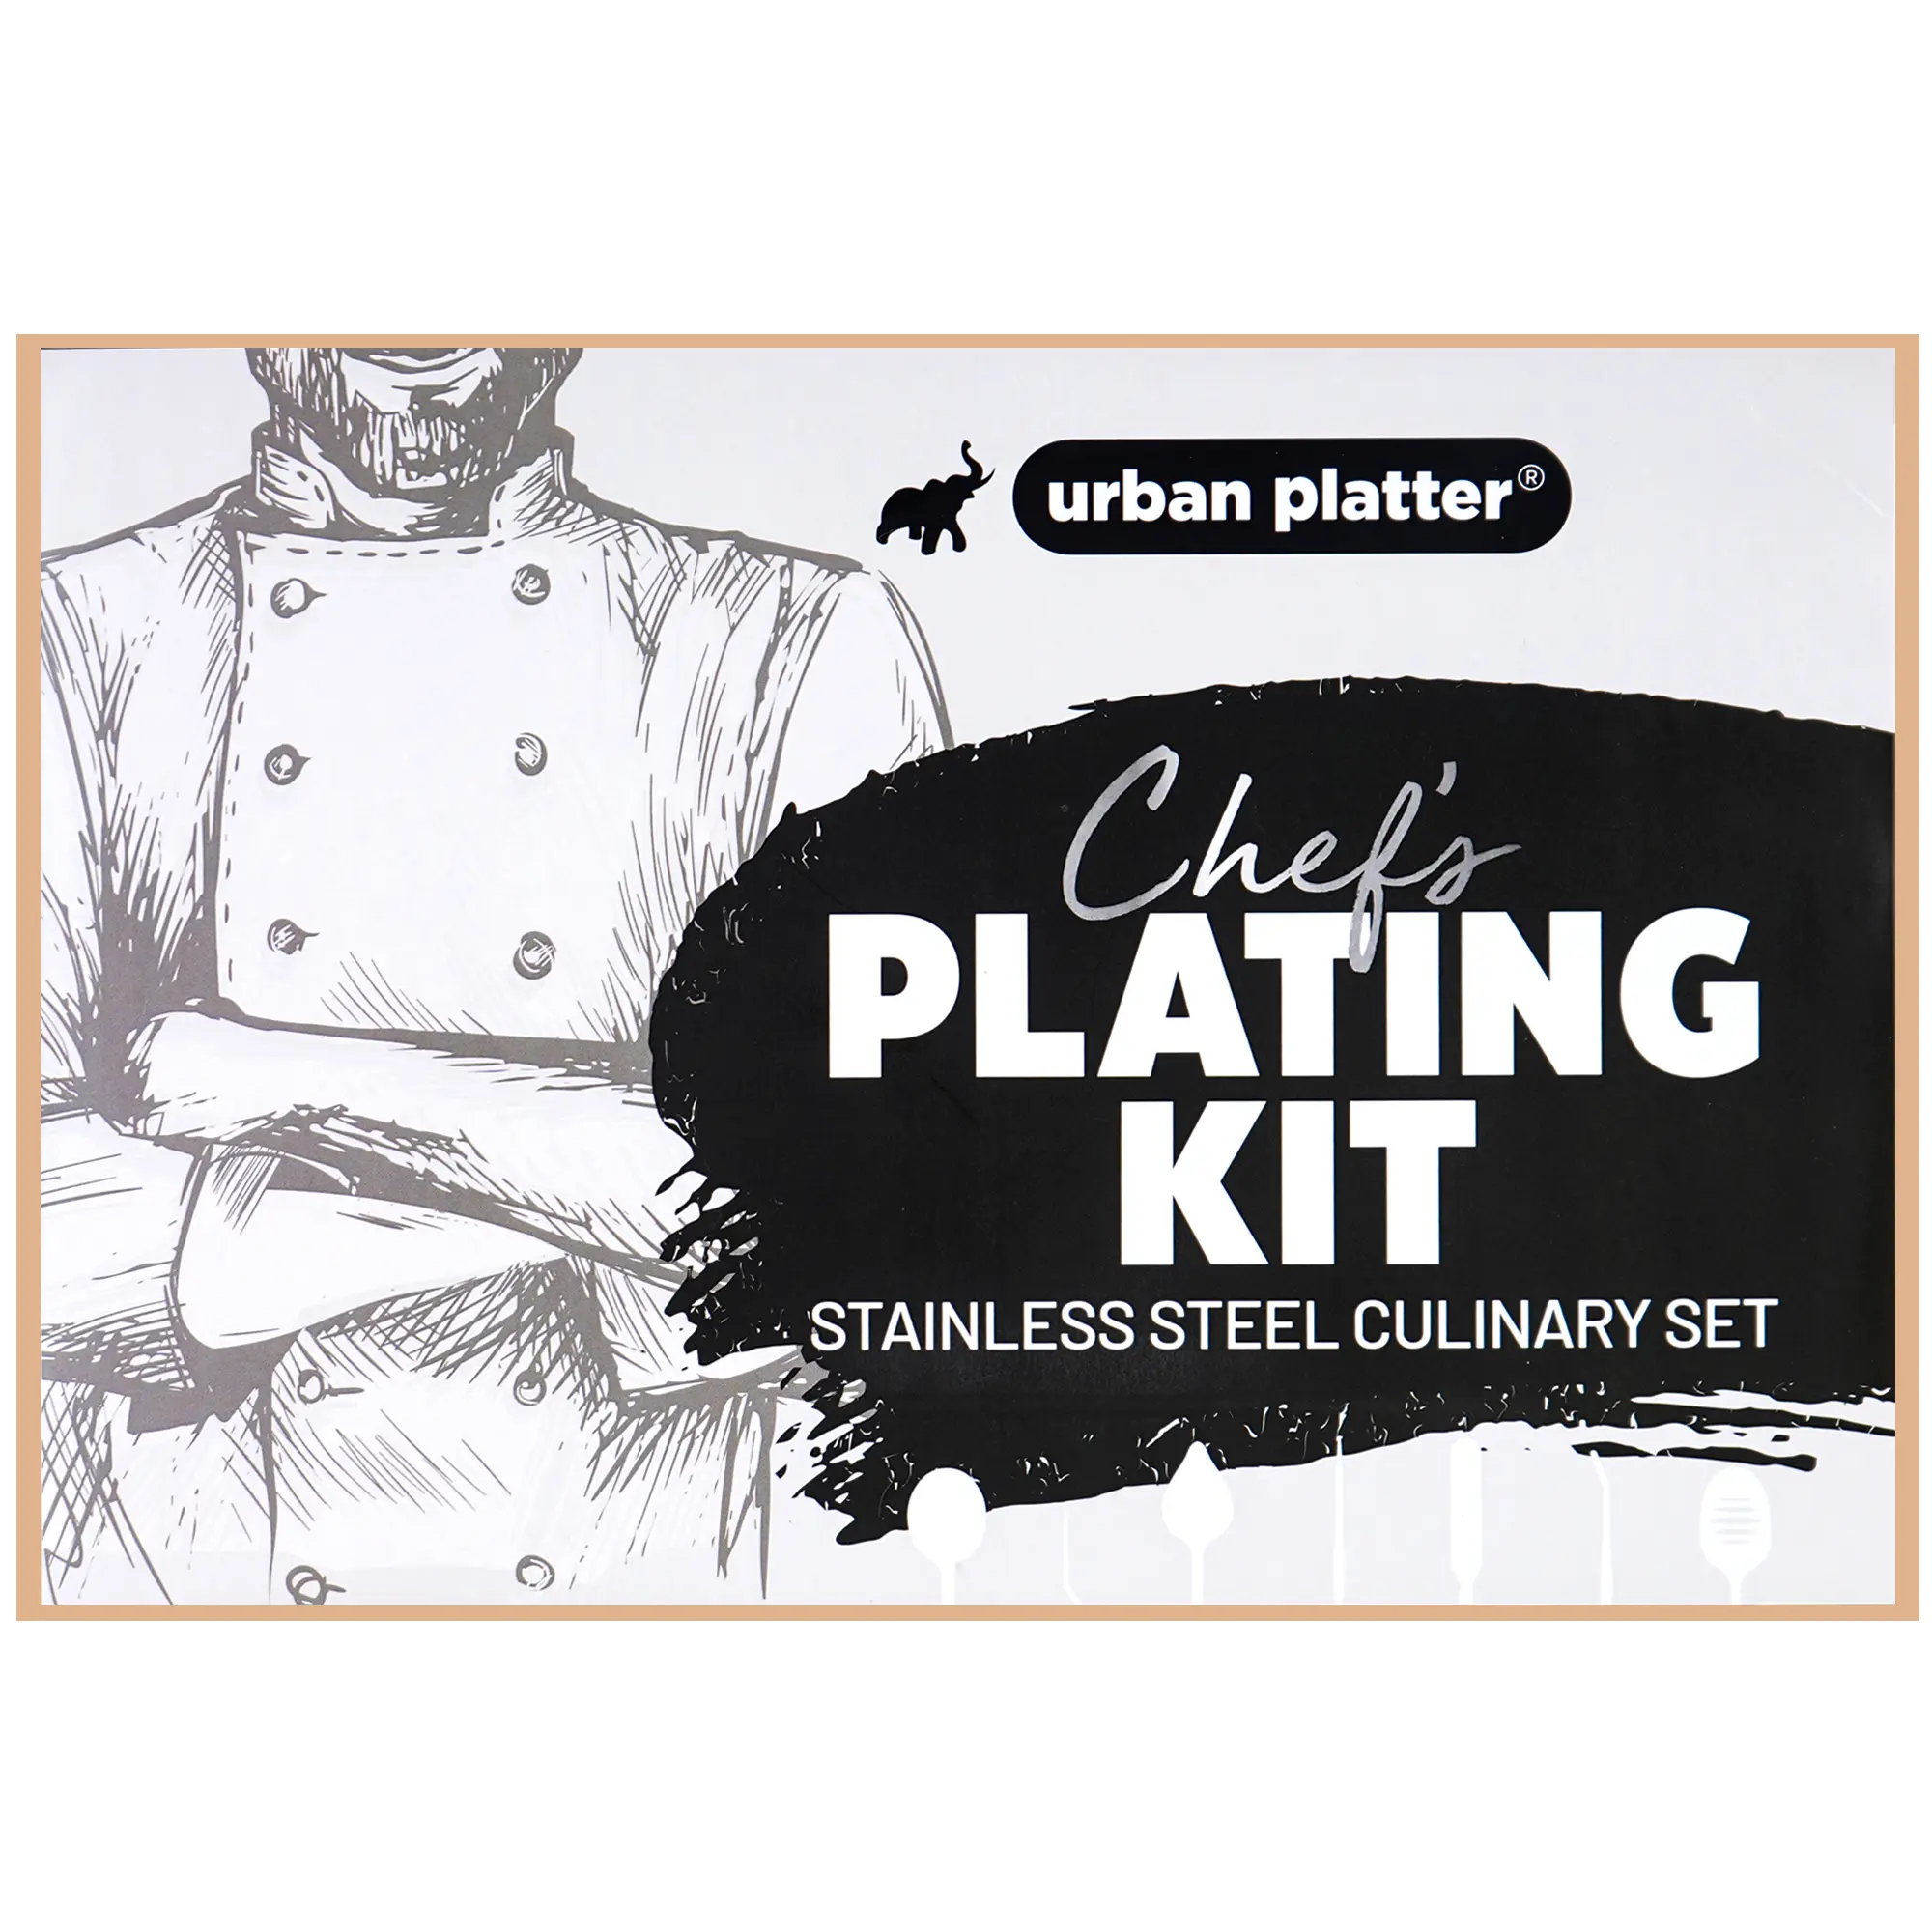 Urban Platter Professional Chef's Plating Kit – 7 Piece Stainless